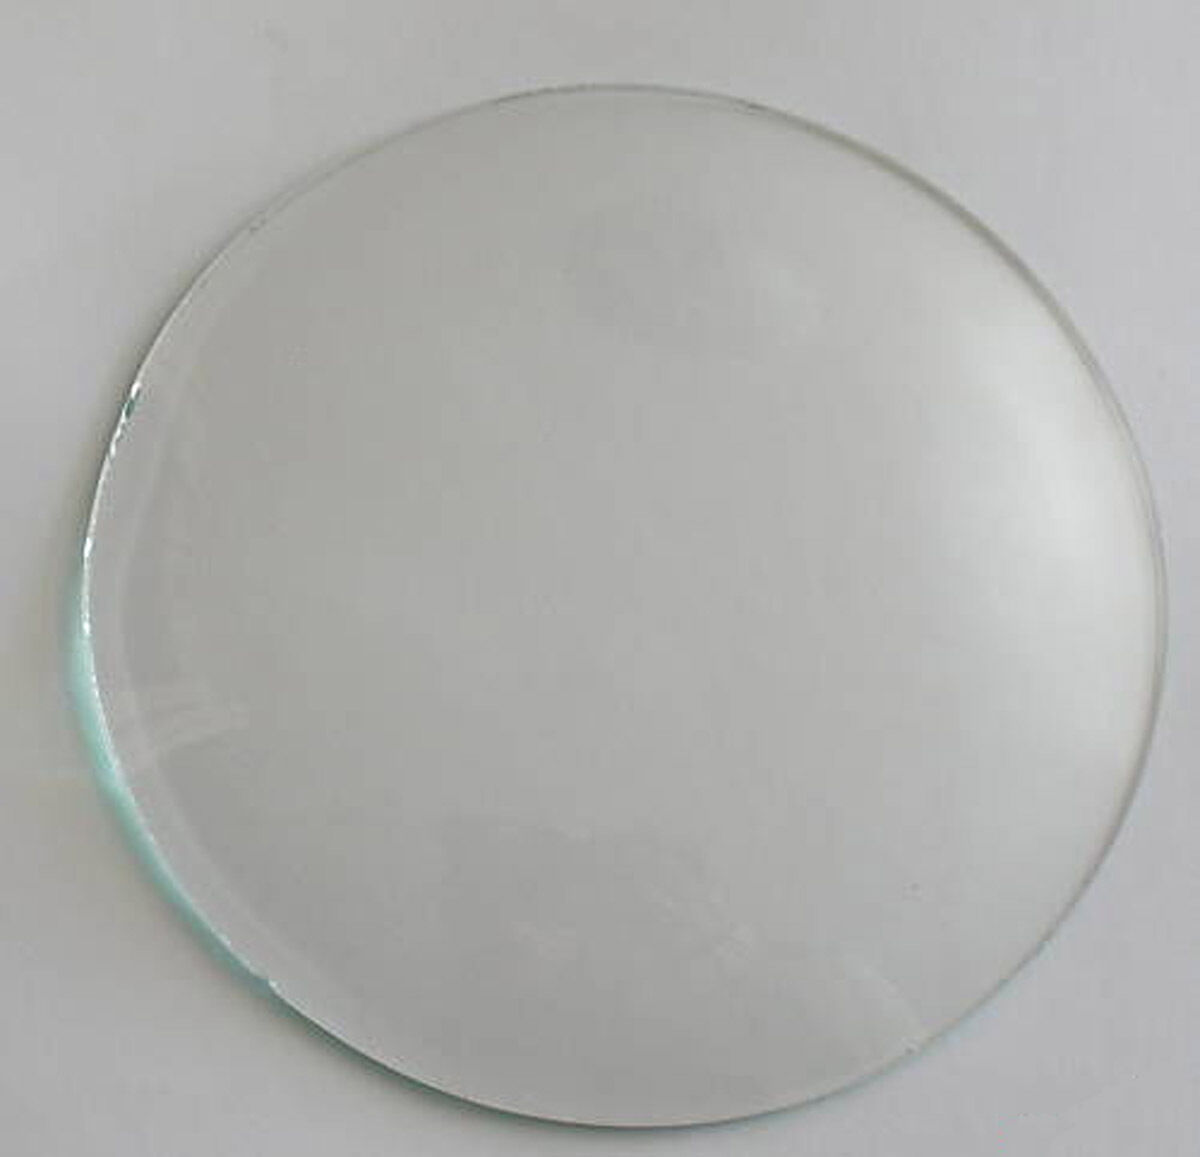 New 1 Piece Of Convex Clock Glass - Choose From 6" To 6-7/8"